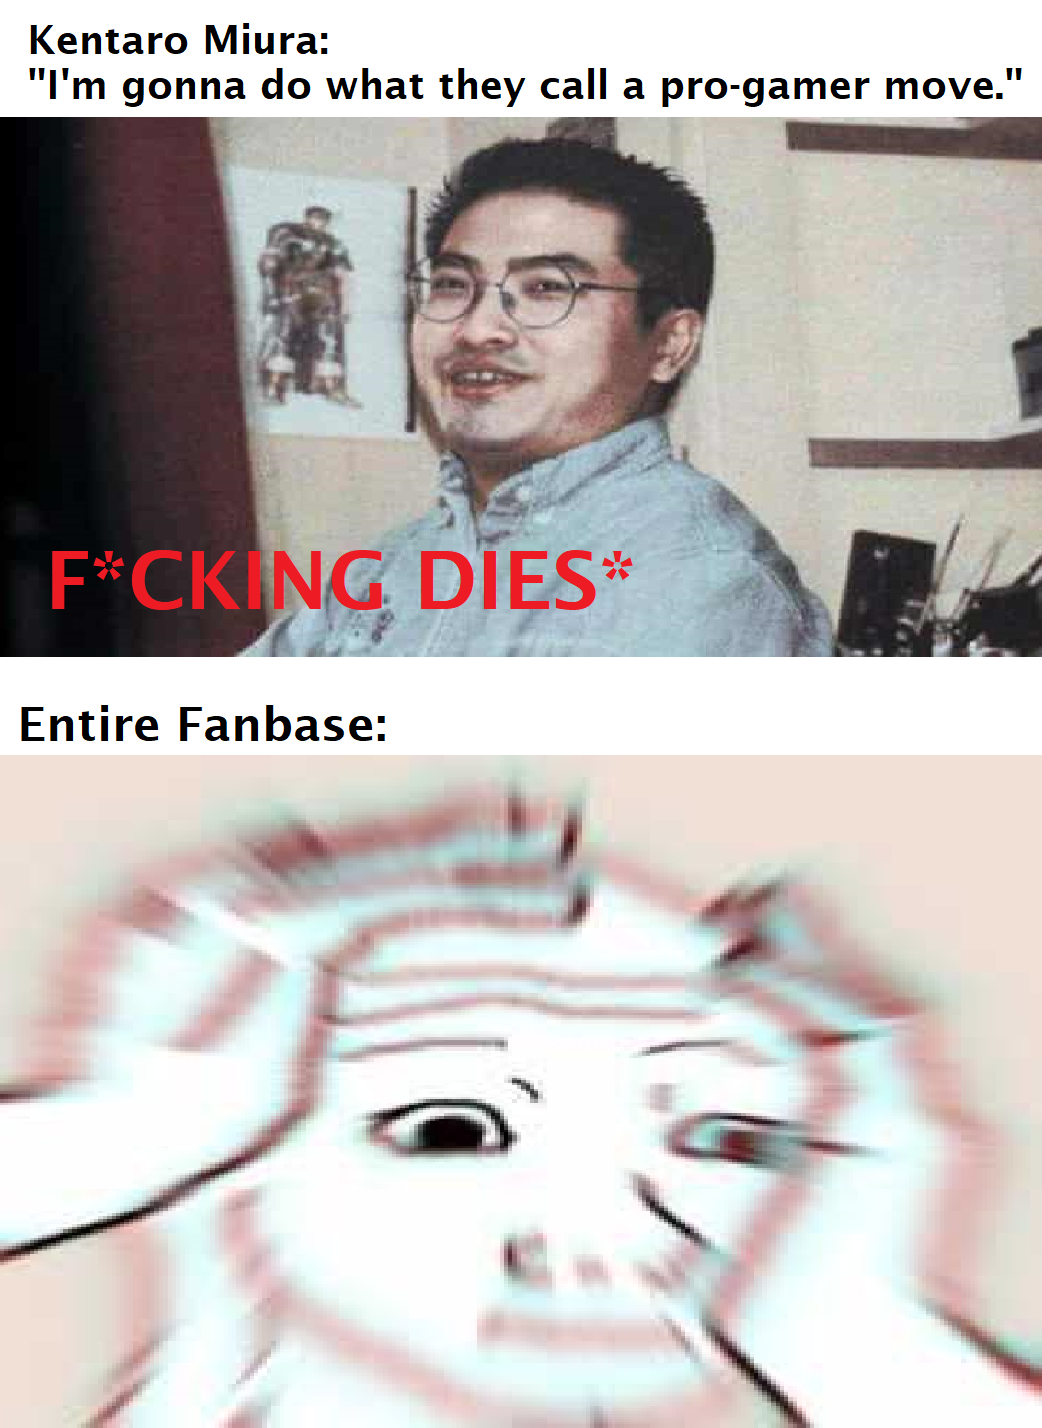 Rest in pepperoni Kentaro Miura, King of Trolling and a fookin' legend. F